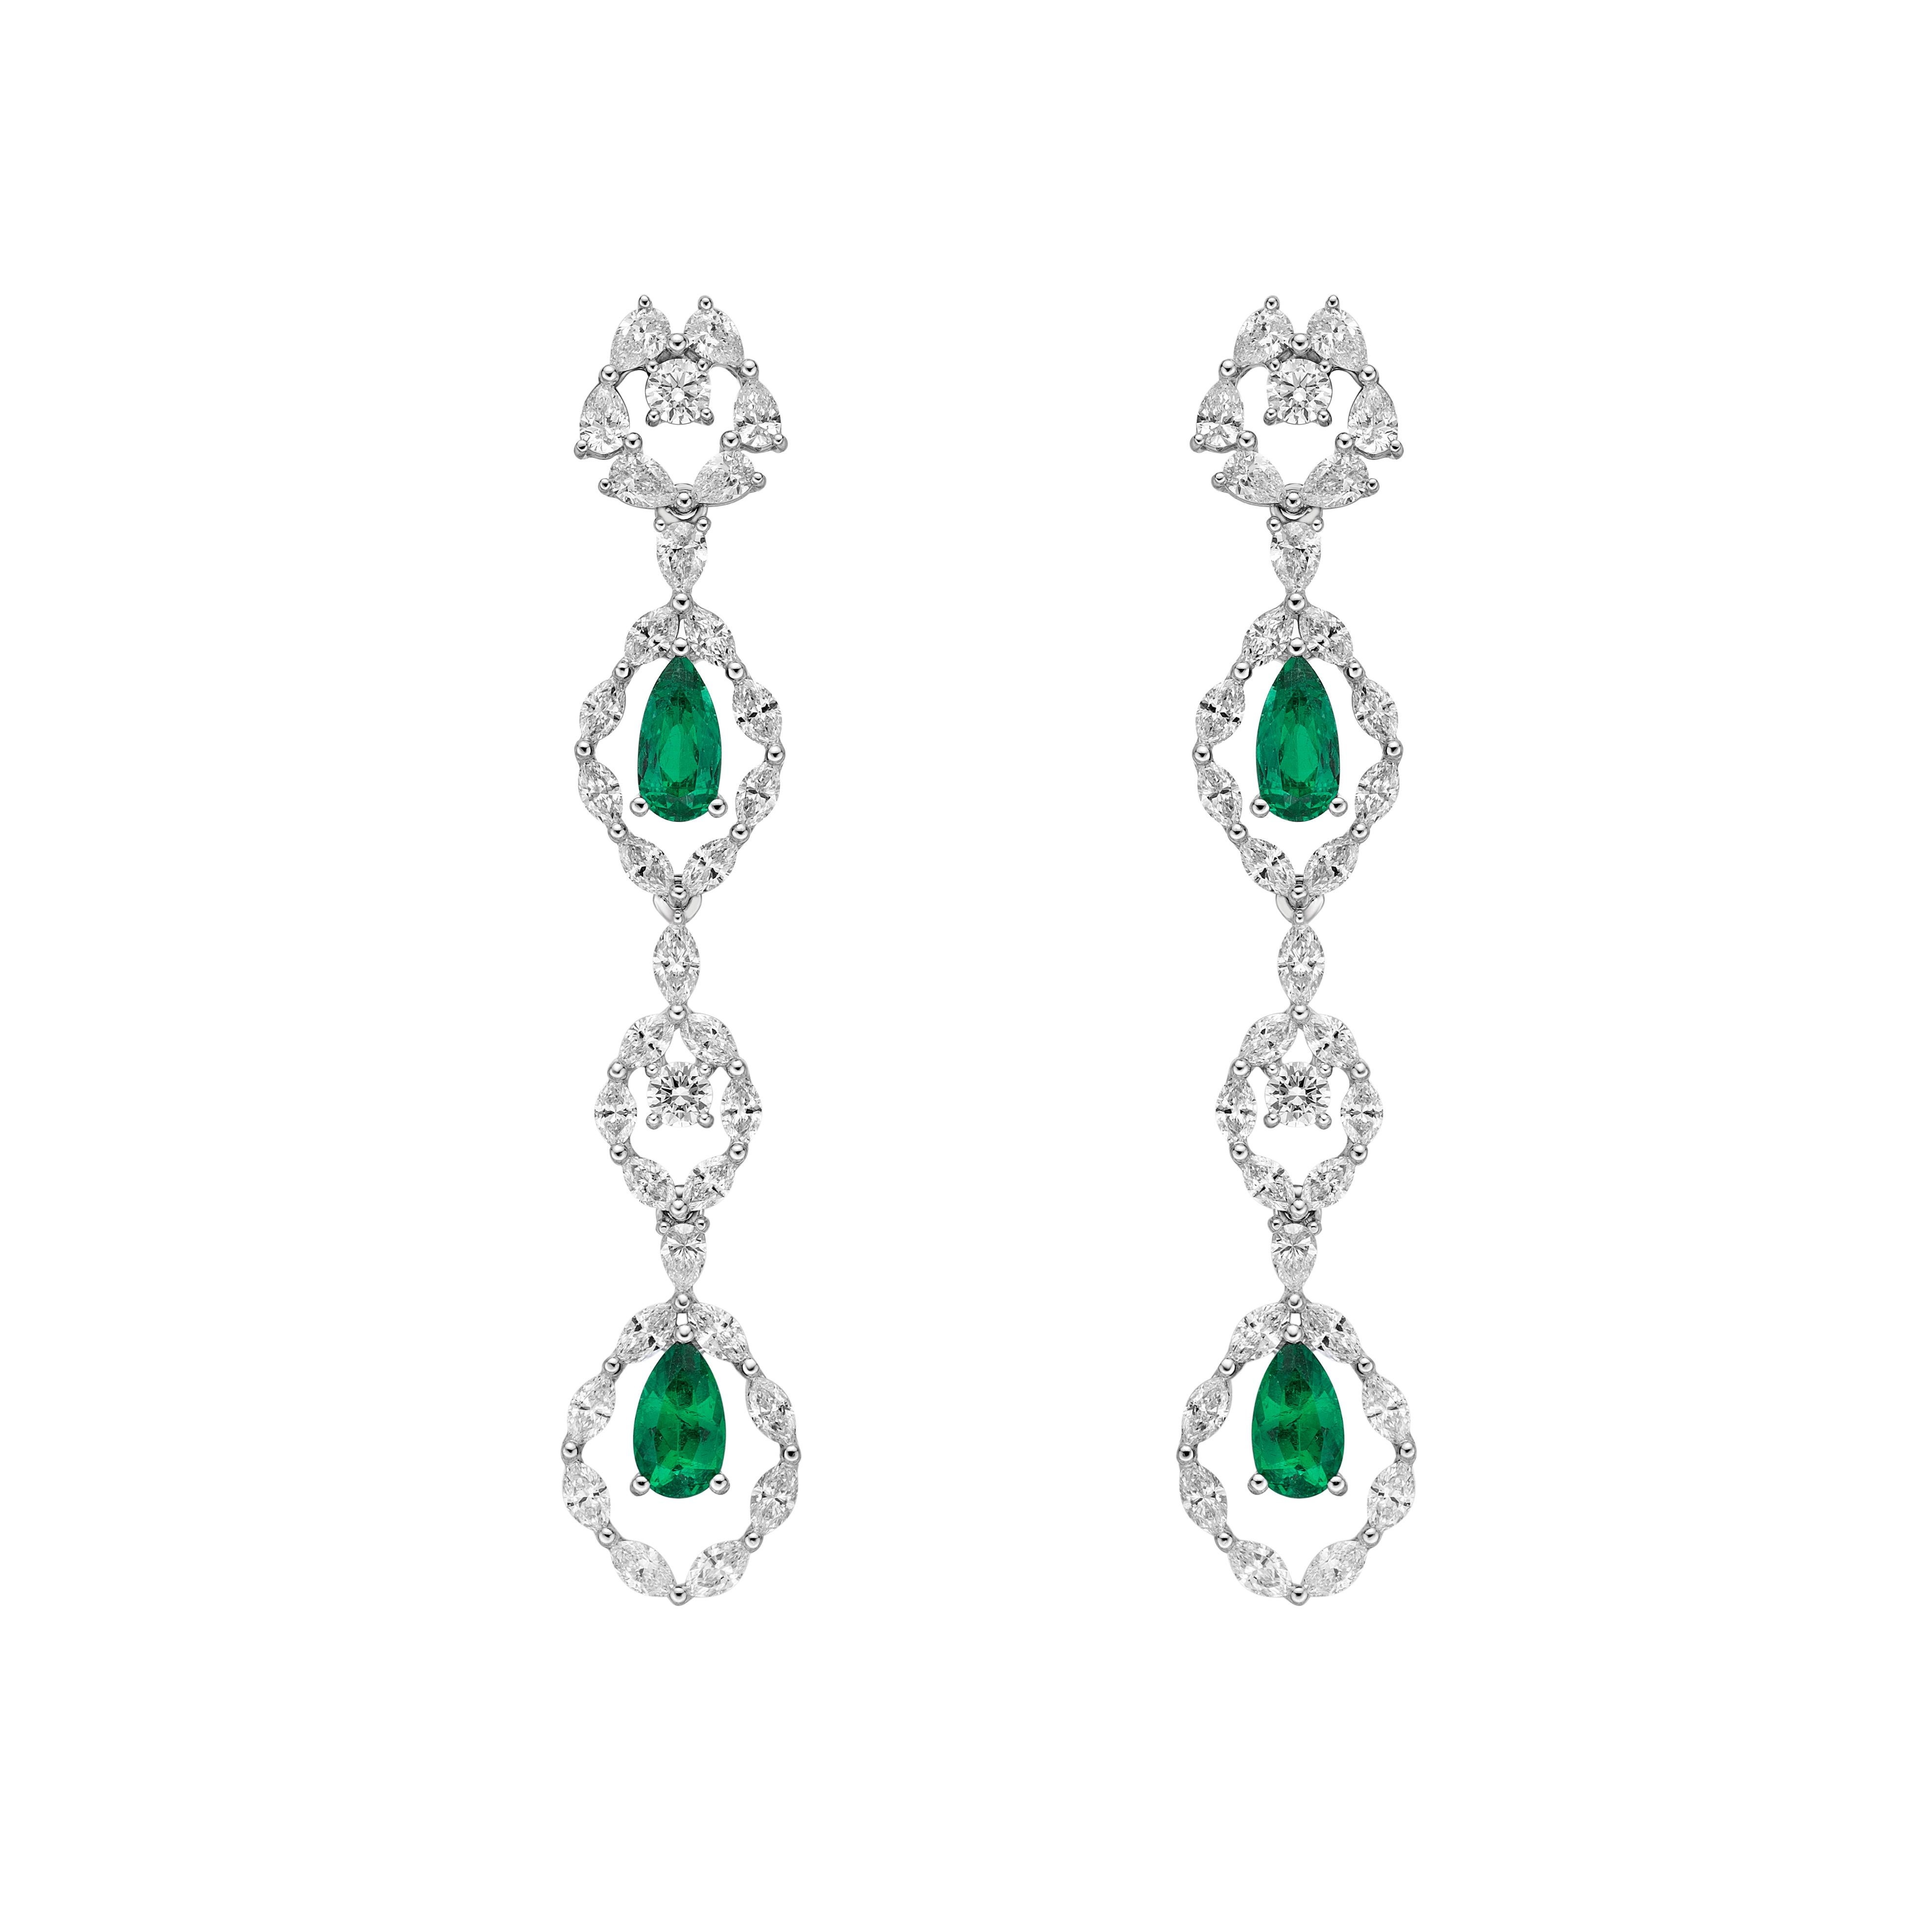 Pear Cut 2.3 Carat Colombian Emerald and Diamond Earrings in 18 Karat White Gold For Sale